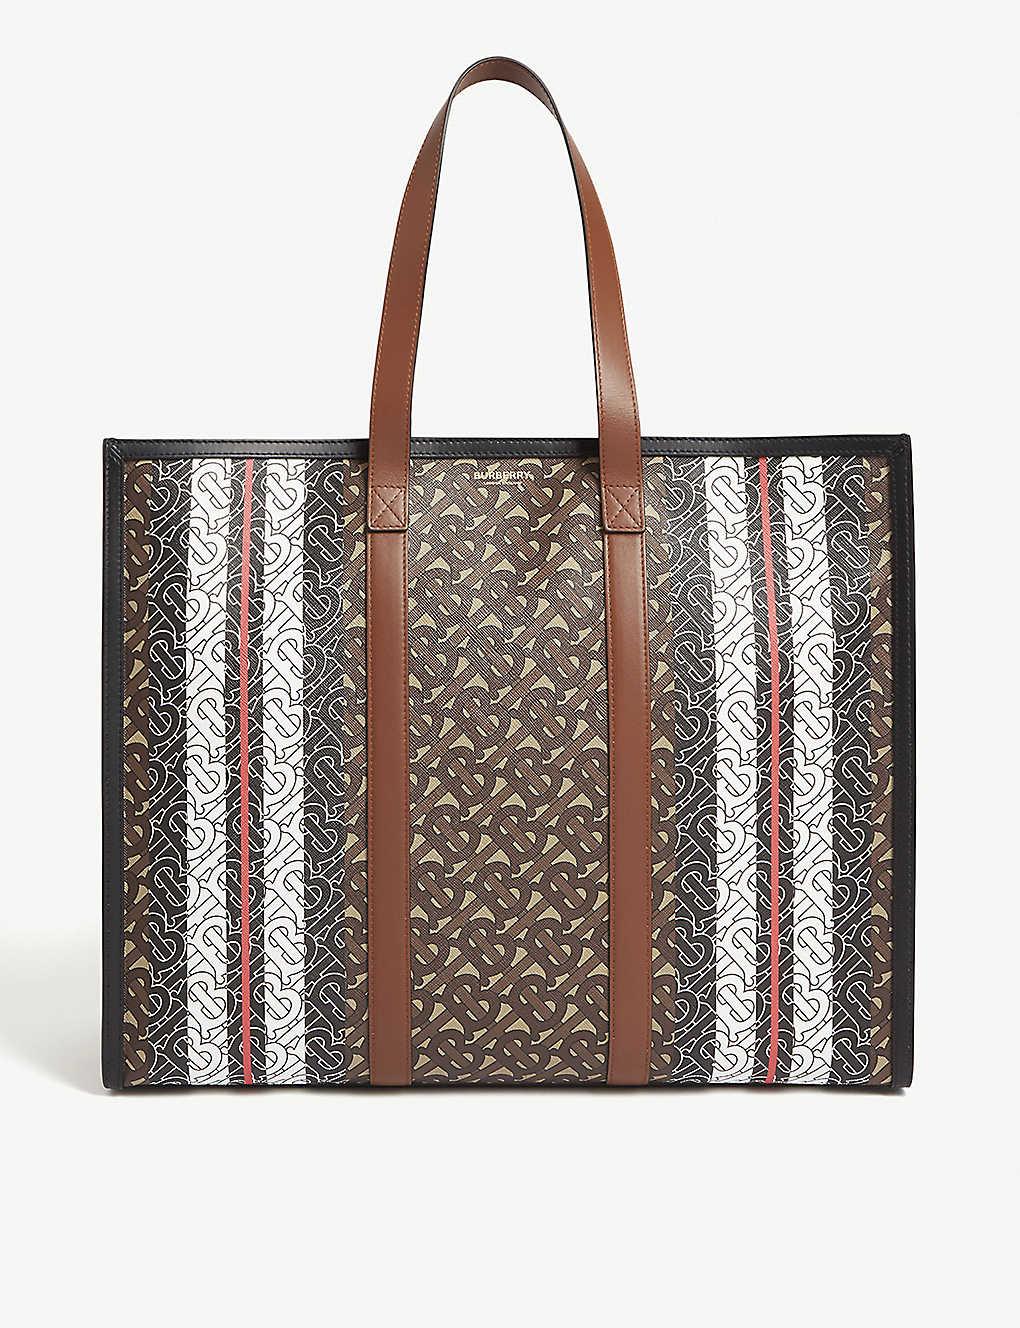 Burberry Tb Monogram E-canvas Tote Bag in Bridle Brown/Gold (Brown) - Save 28% - Lyst